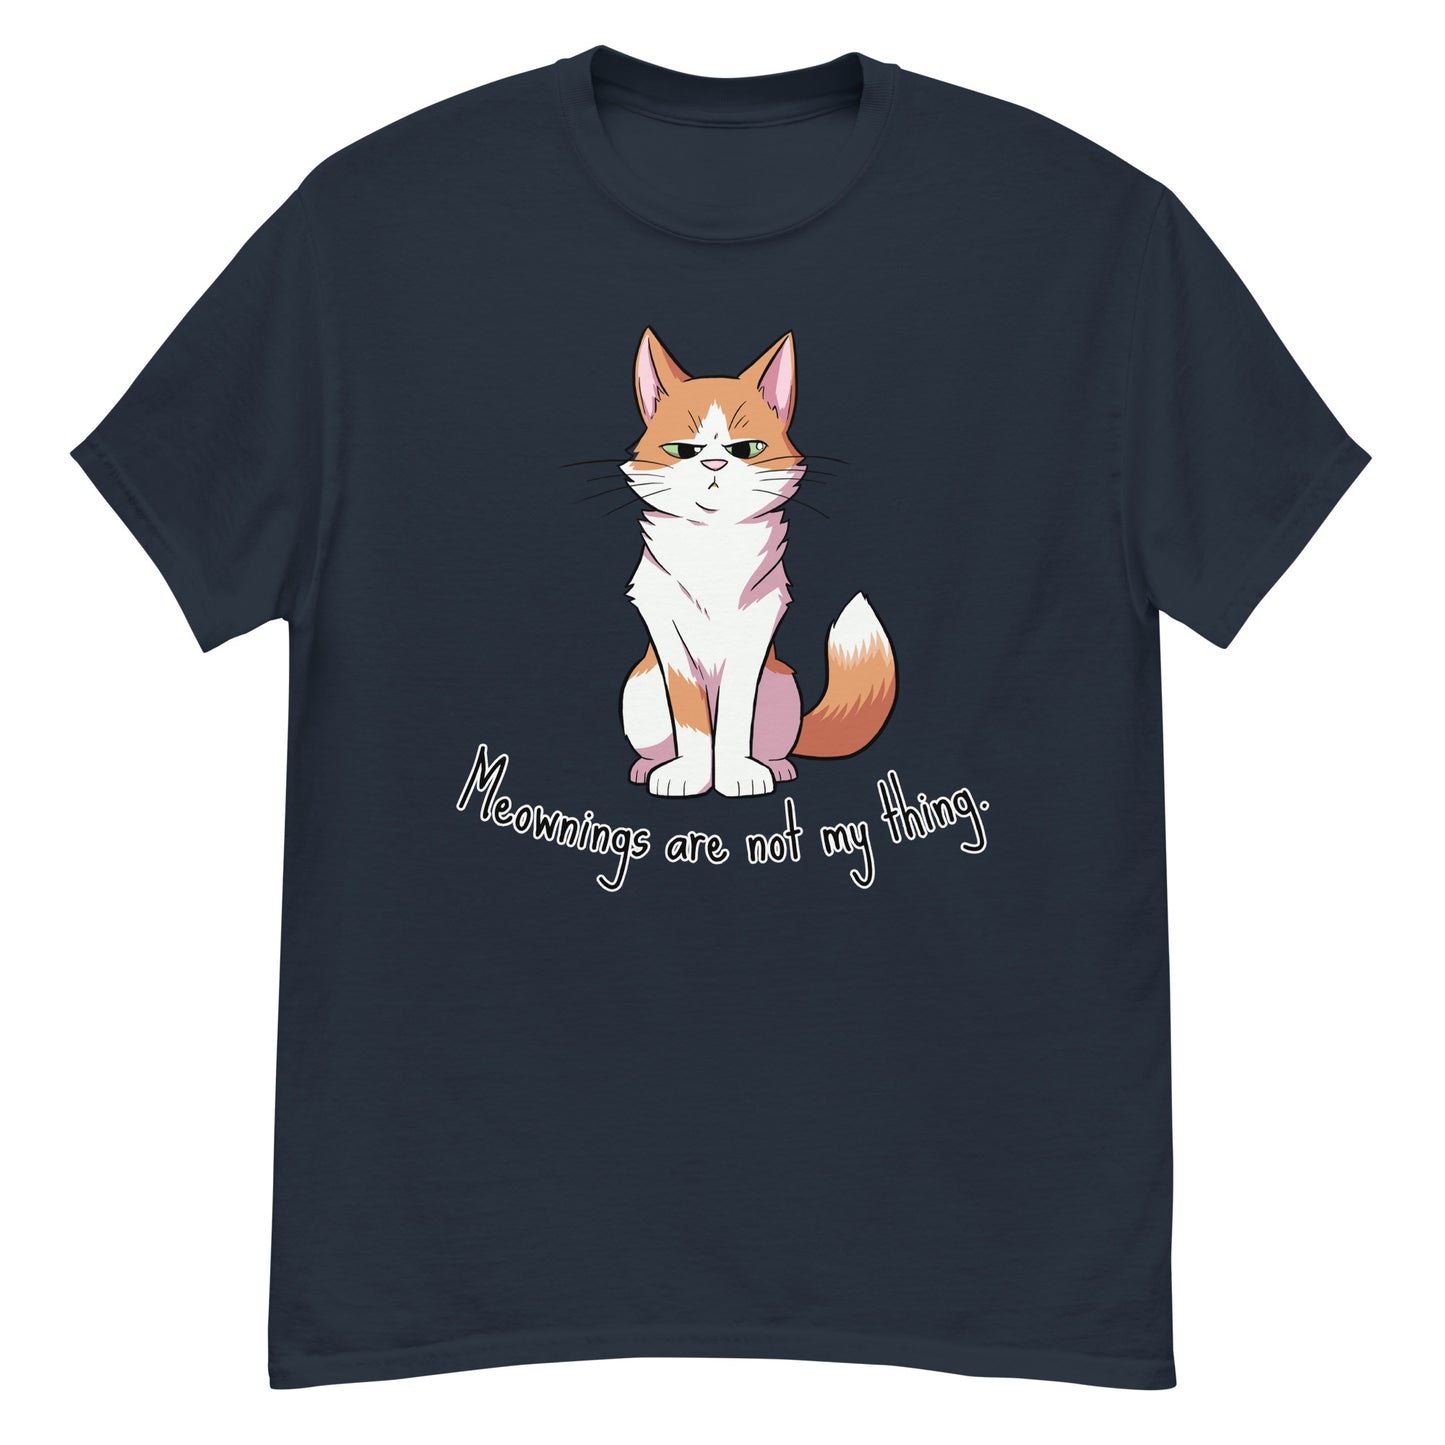 Ginger - Meownings are not my thing Men's classic tee